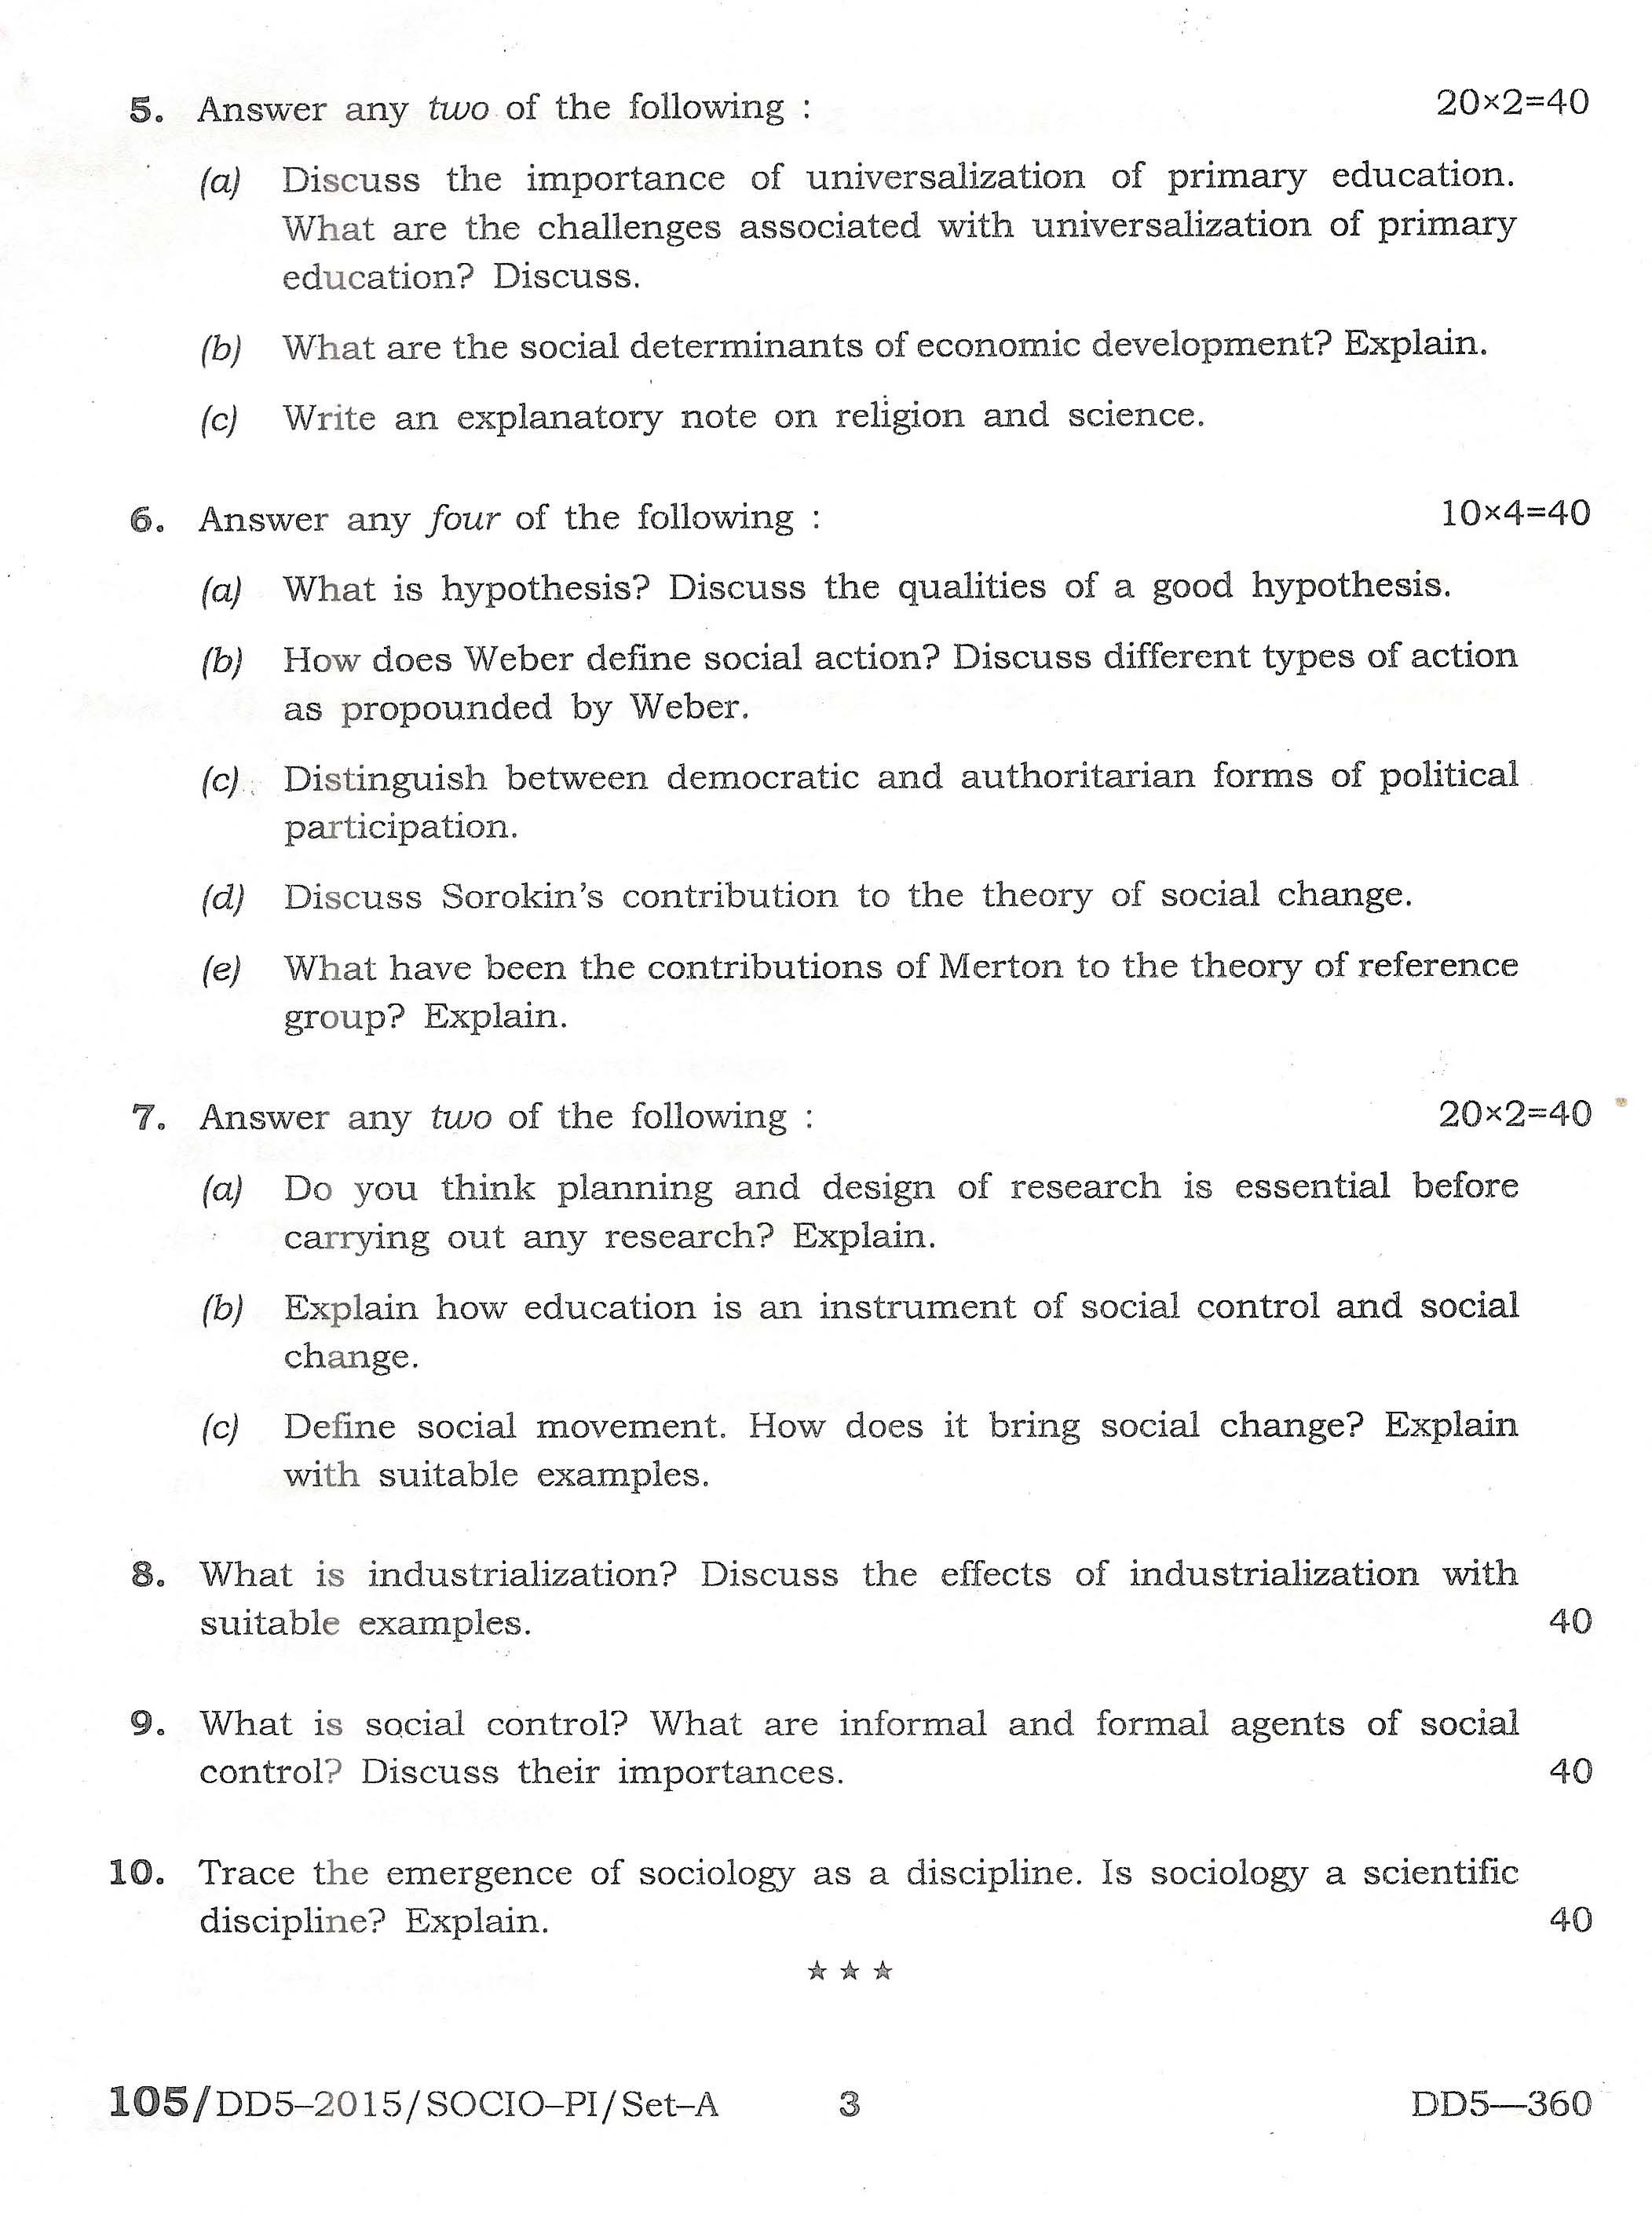 APPSC Combined Competitive Main Exam 2015 Sociology Paper I 3